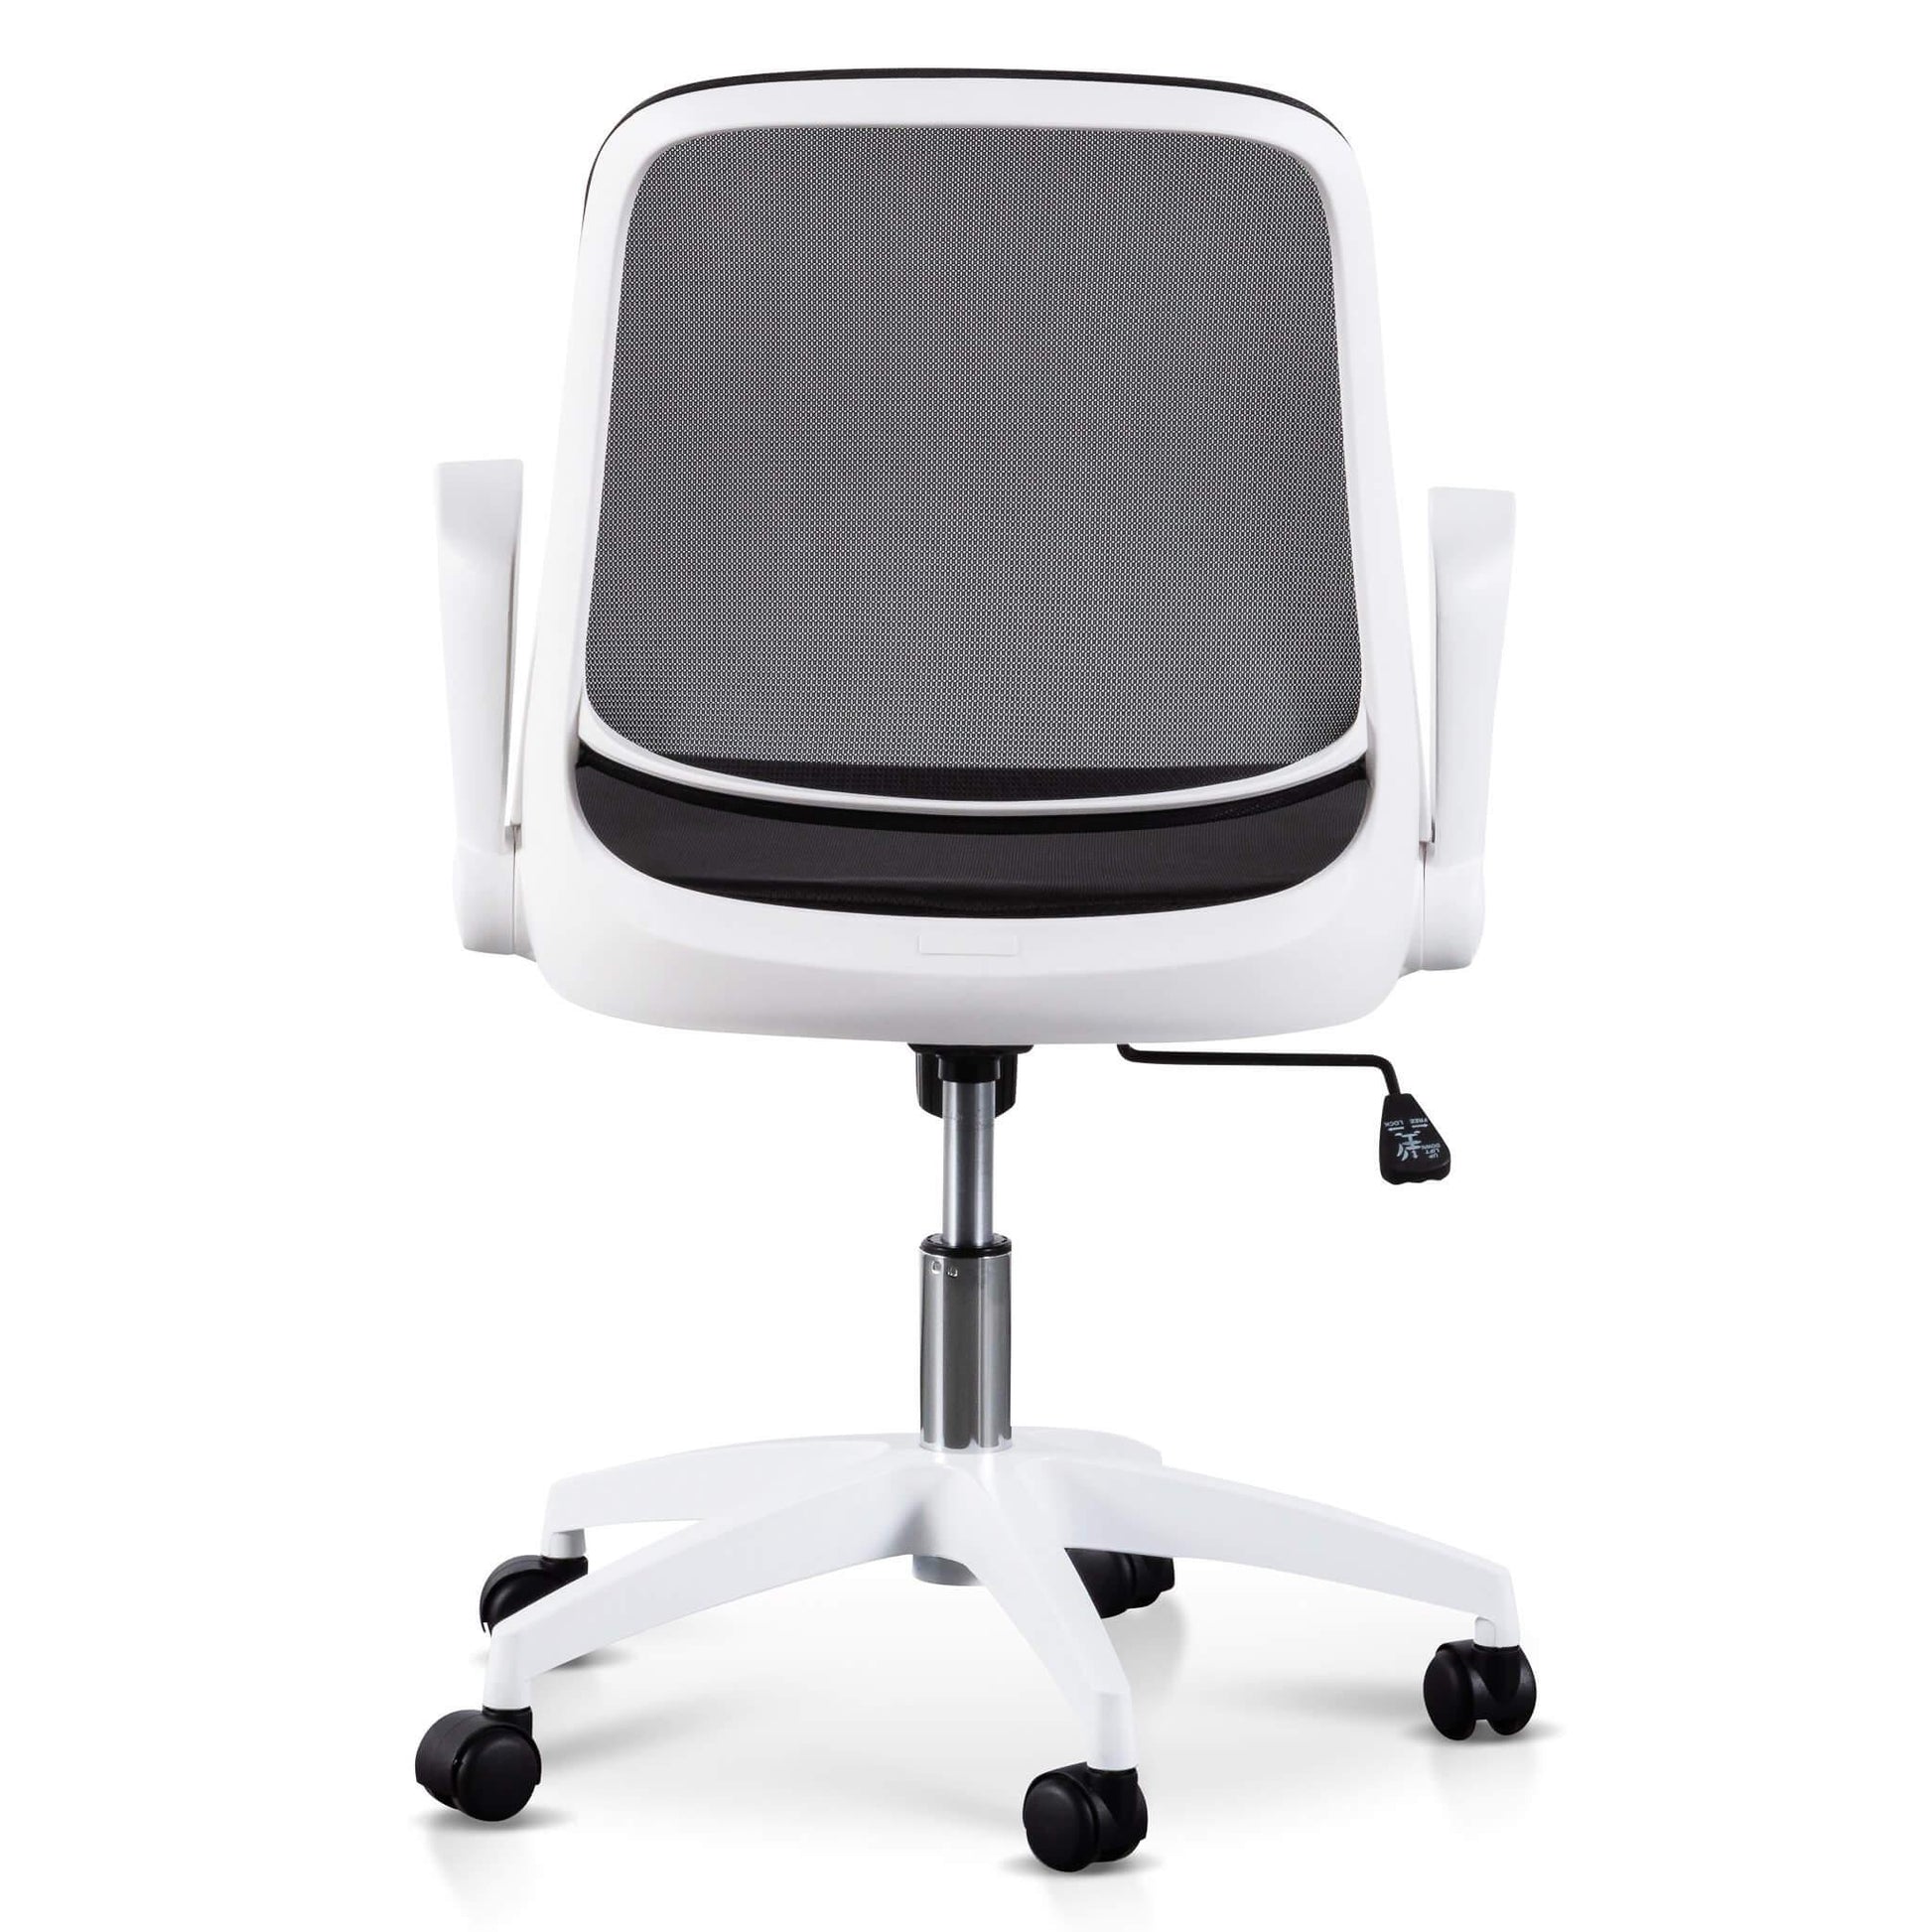 Calibre Black Office Chair - White Arm and Base OC6190-LF - Office/Gaming ChairsOC6190-LF 3